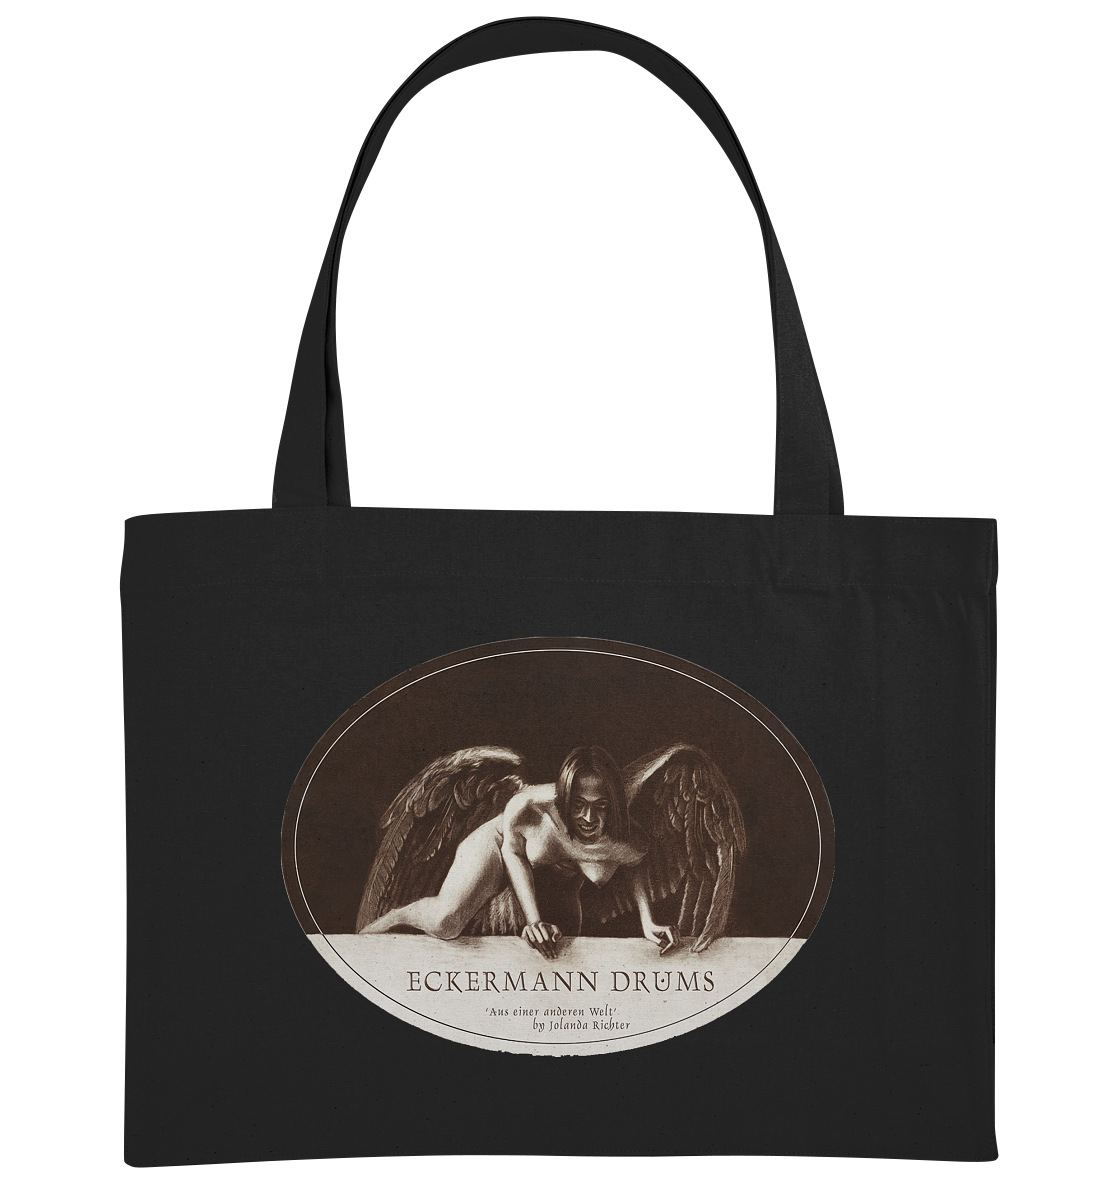 Eckermann DRUMS - "From Another World" - Organic Shopping-Bag